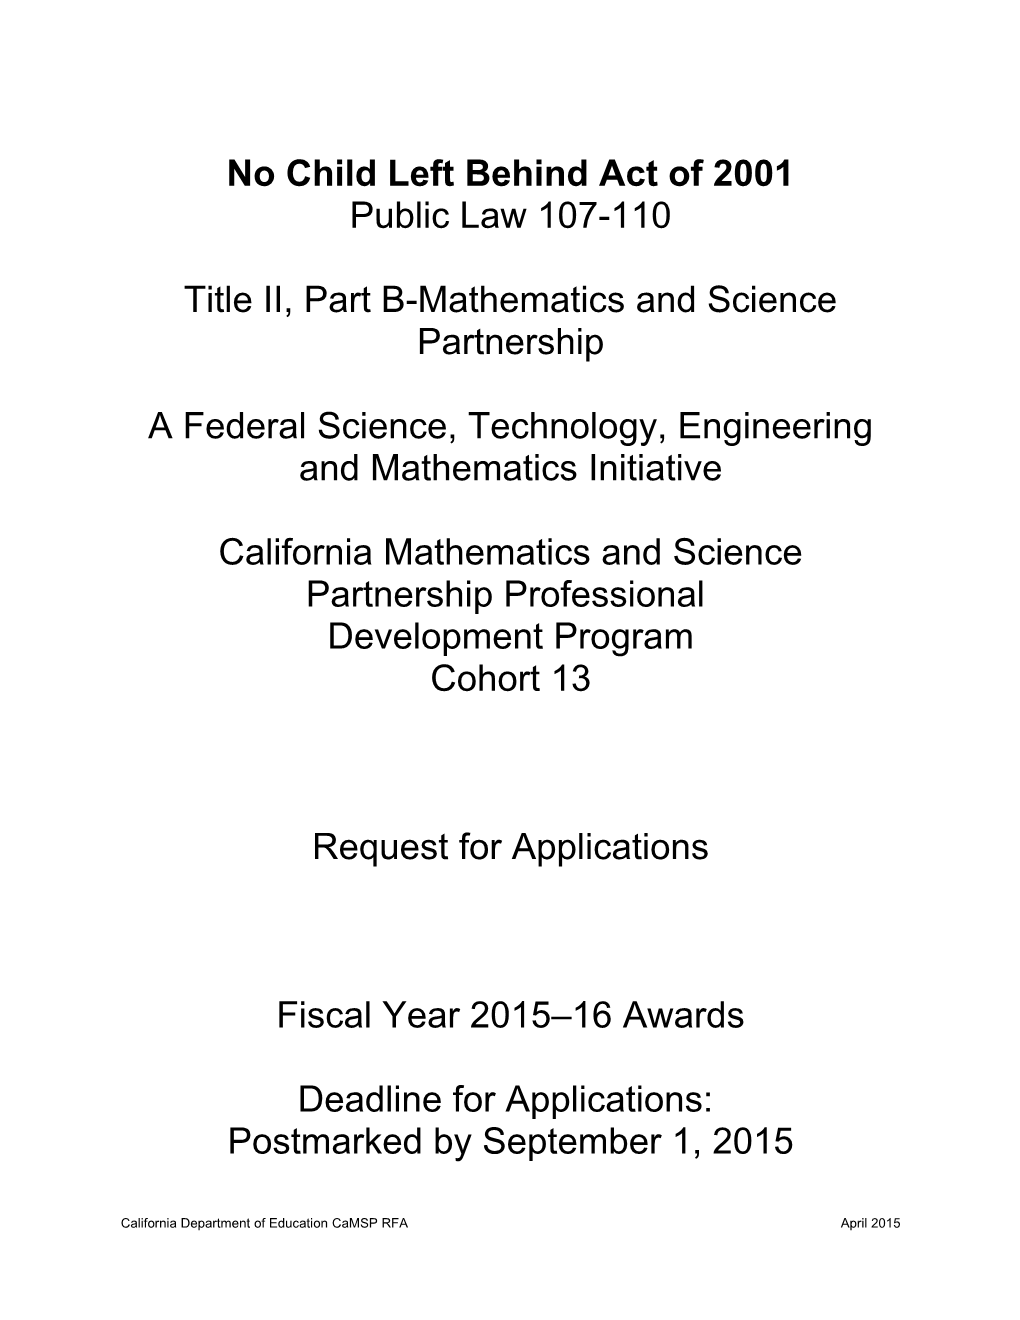 RFA-15: Math & Science PD (CA Dept of Education)